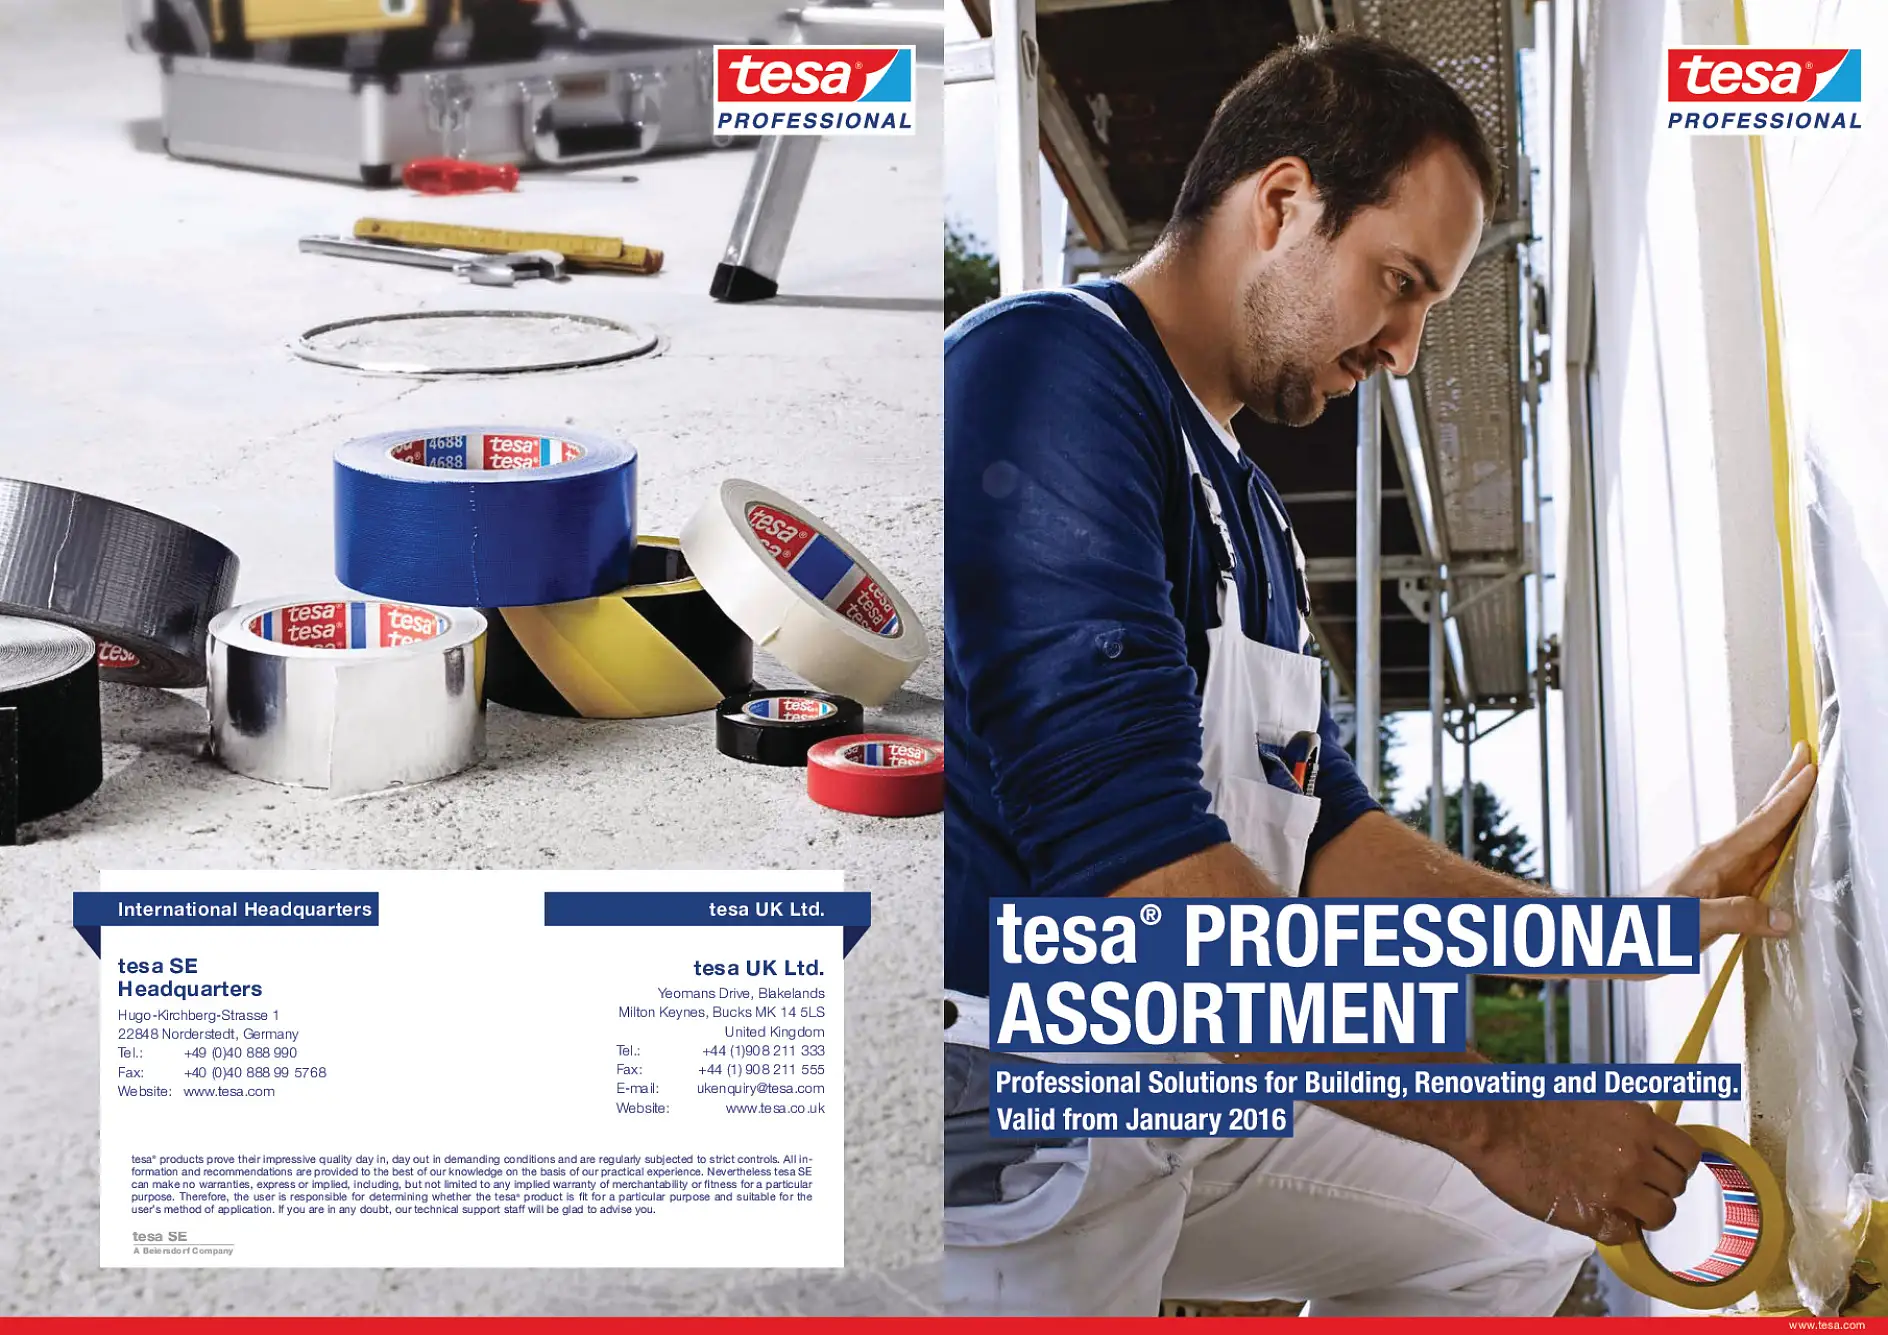 All professional products by tesa.